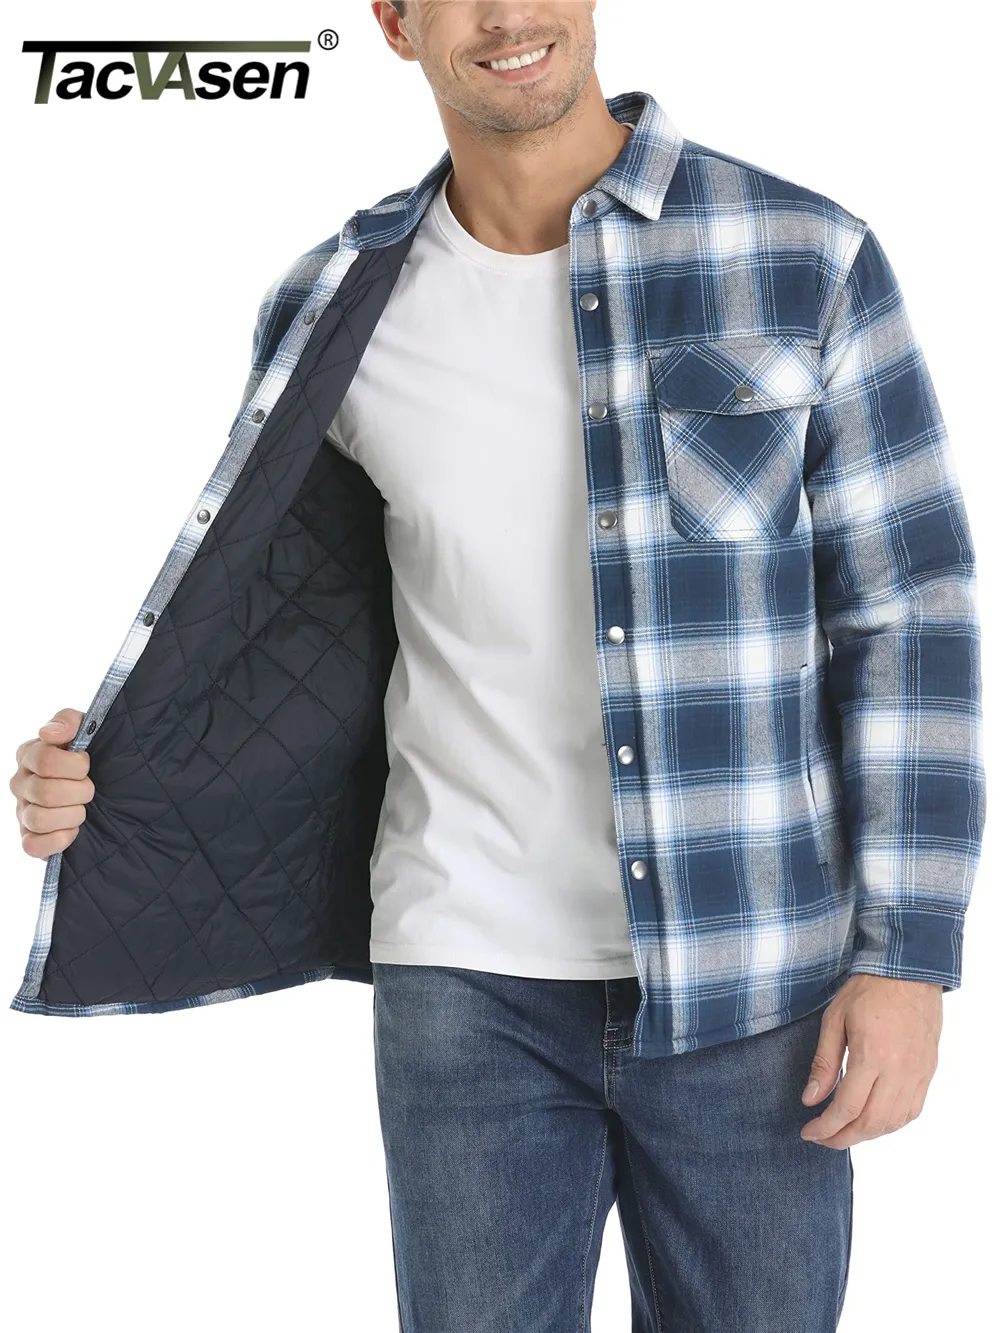 Plaid Flannel Jacket For Men: Multi Pocket Outwear For Winter Hiking Long  Sleeve Quilted Lined Coat With Flannel Tops 230808 From Bei04, $43.89